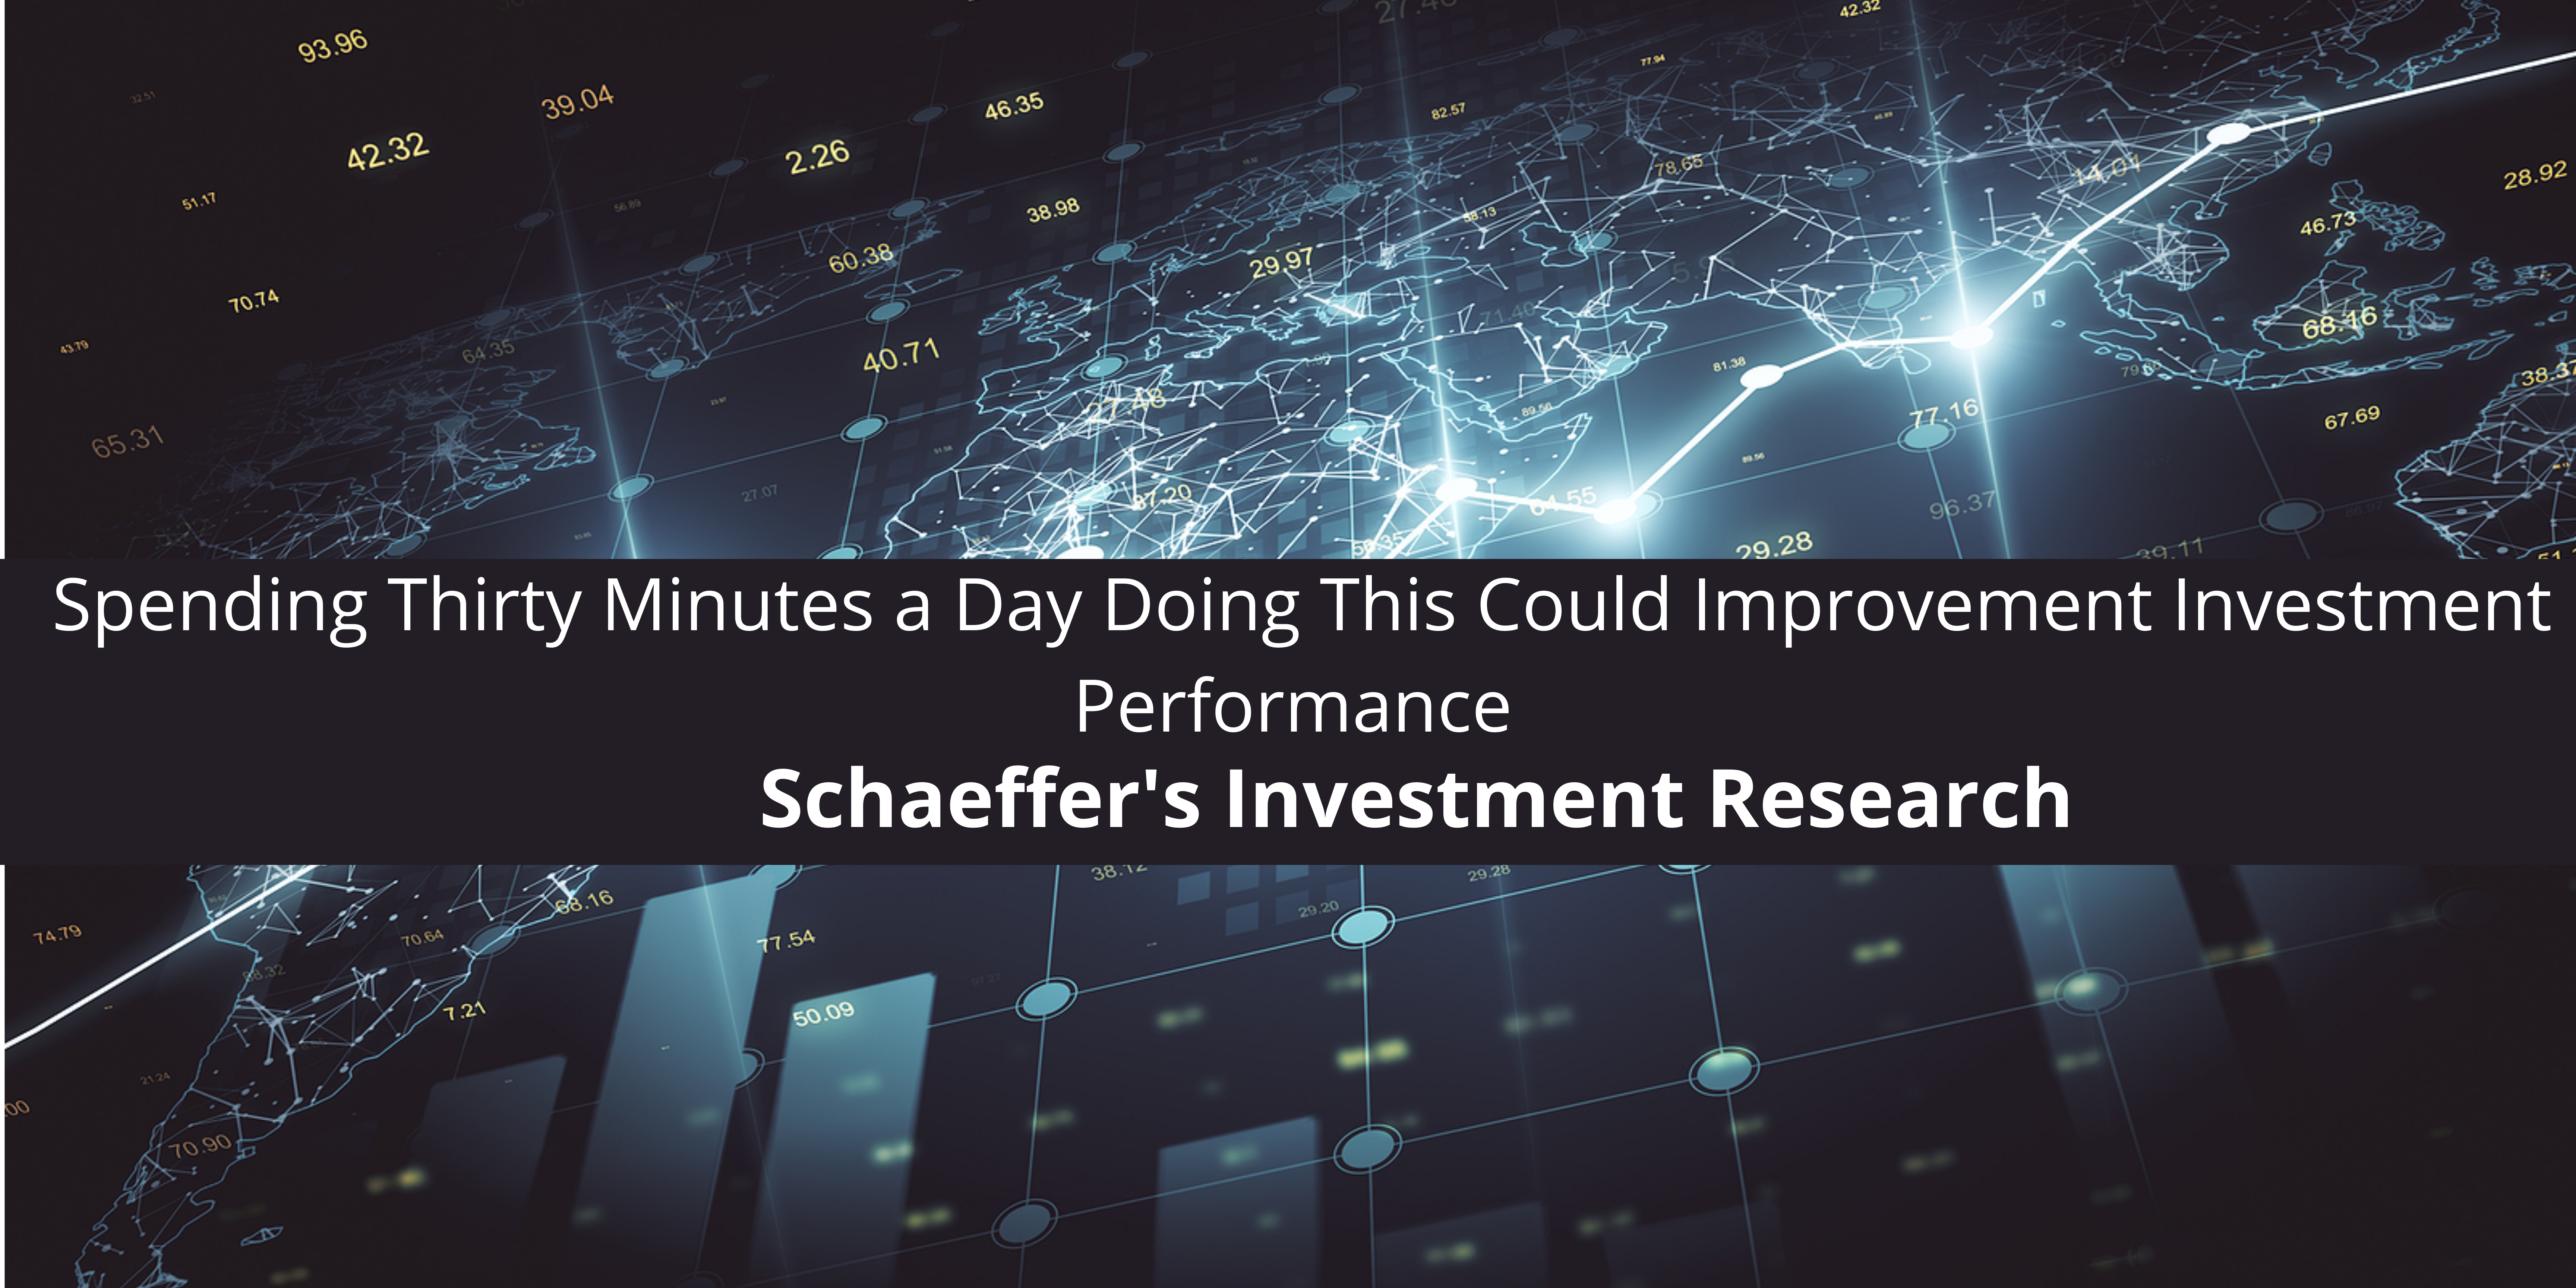 Schaeffer's Investment Research Says Spending Thirty Minutes a Day